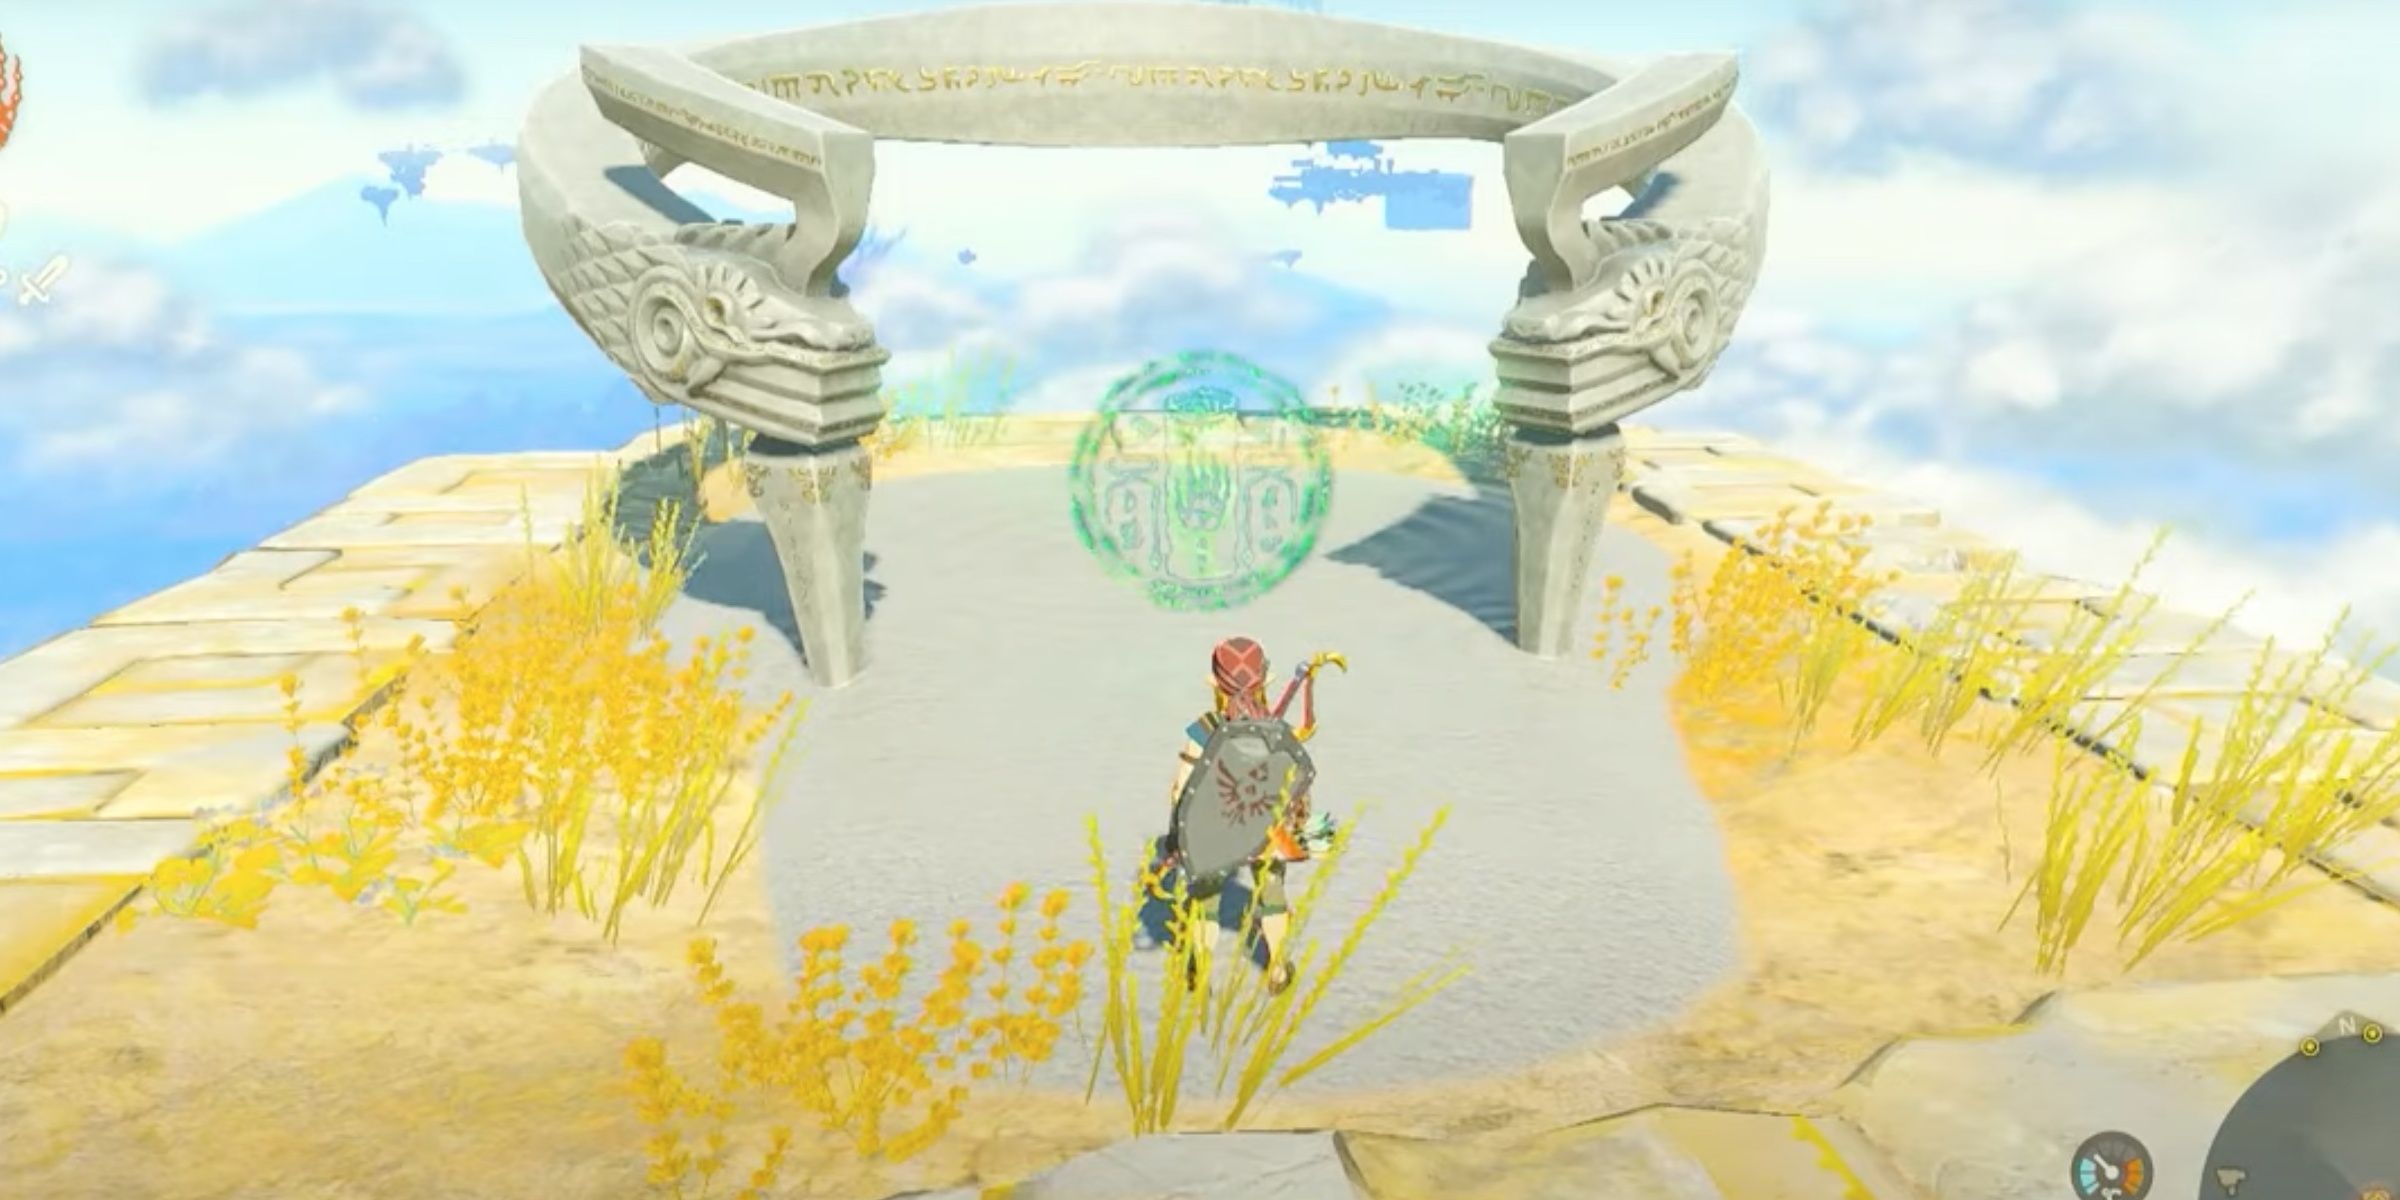 In The Legend of Zelda: Kingdom of Tears, Link stands in front of the Kuma Mine shrine.